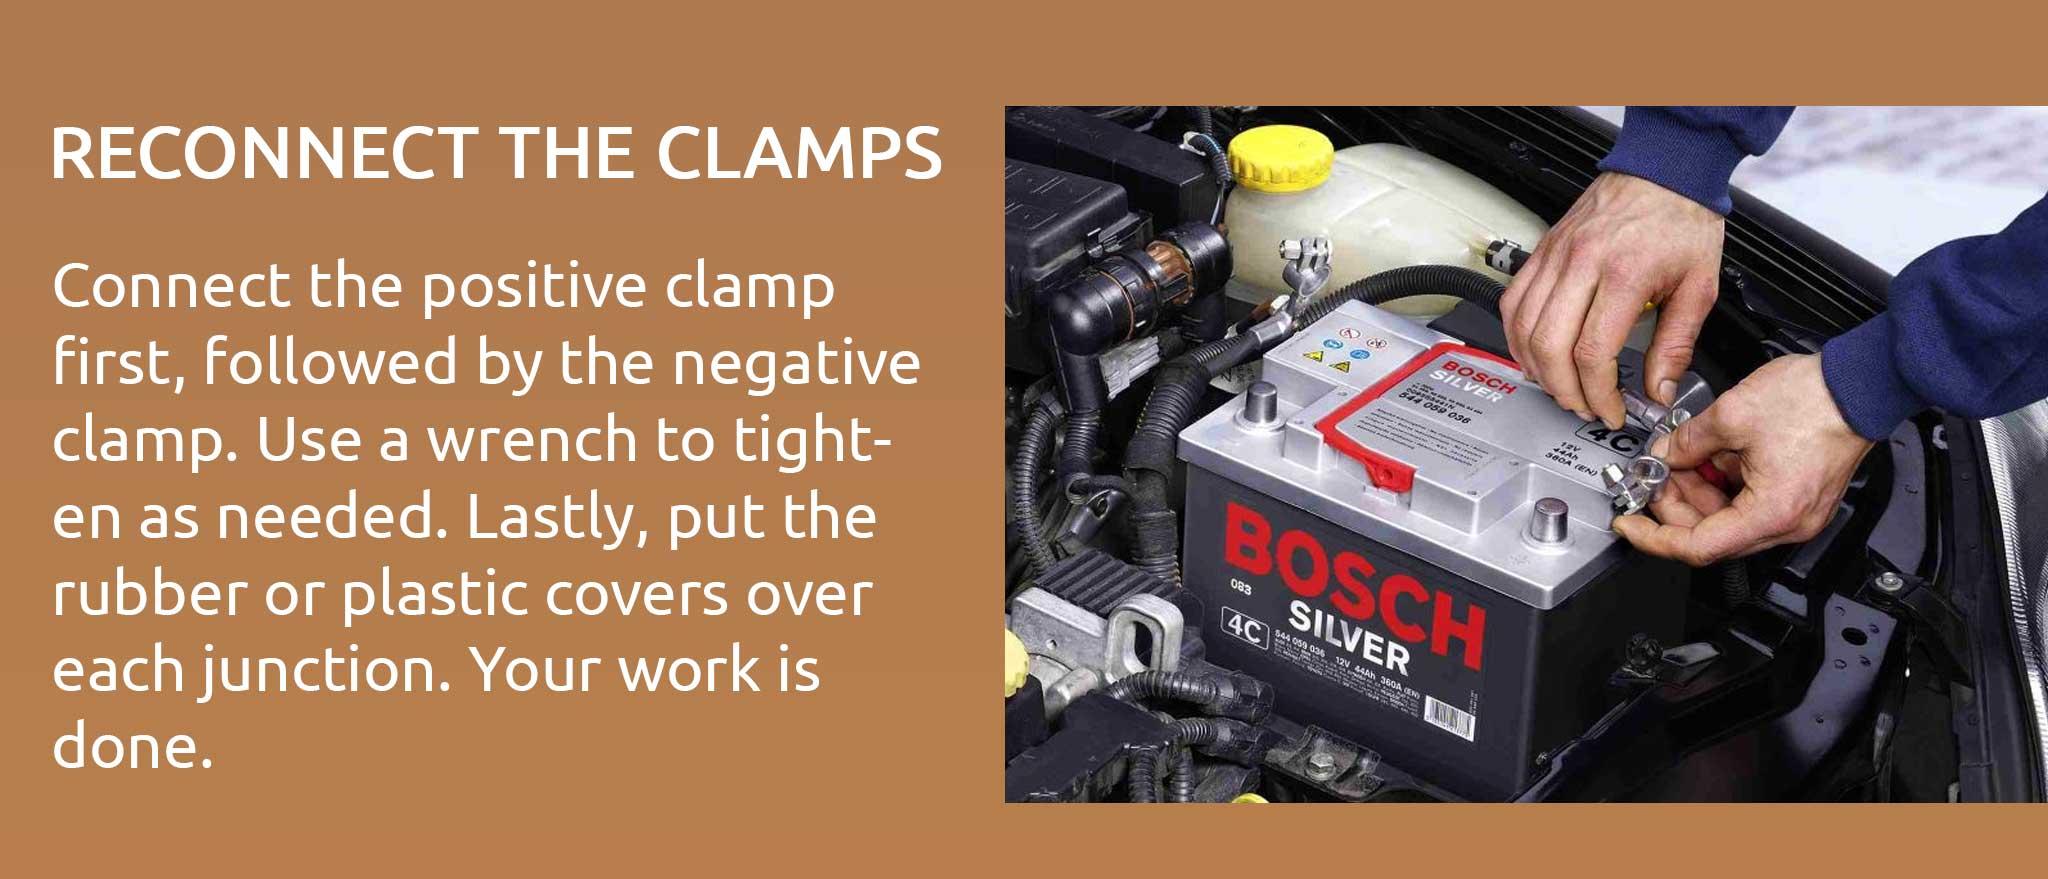 Connect the positive clamp first, followed by the negative clamp. Use a wrench to tighten as needed. Lastly, put the rubber or plastic covers over each junction. Your work is done.